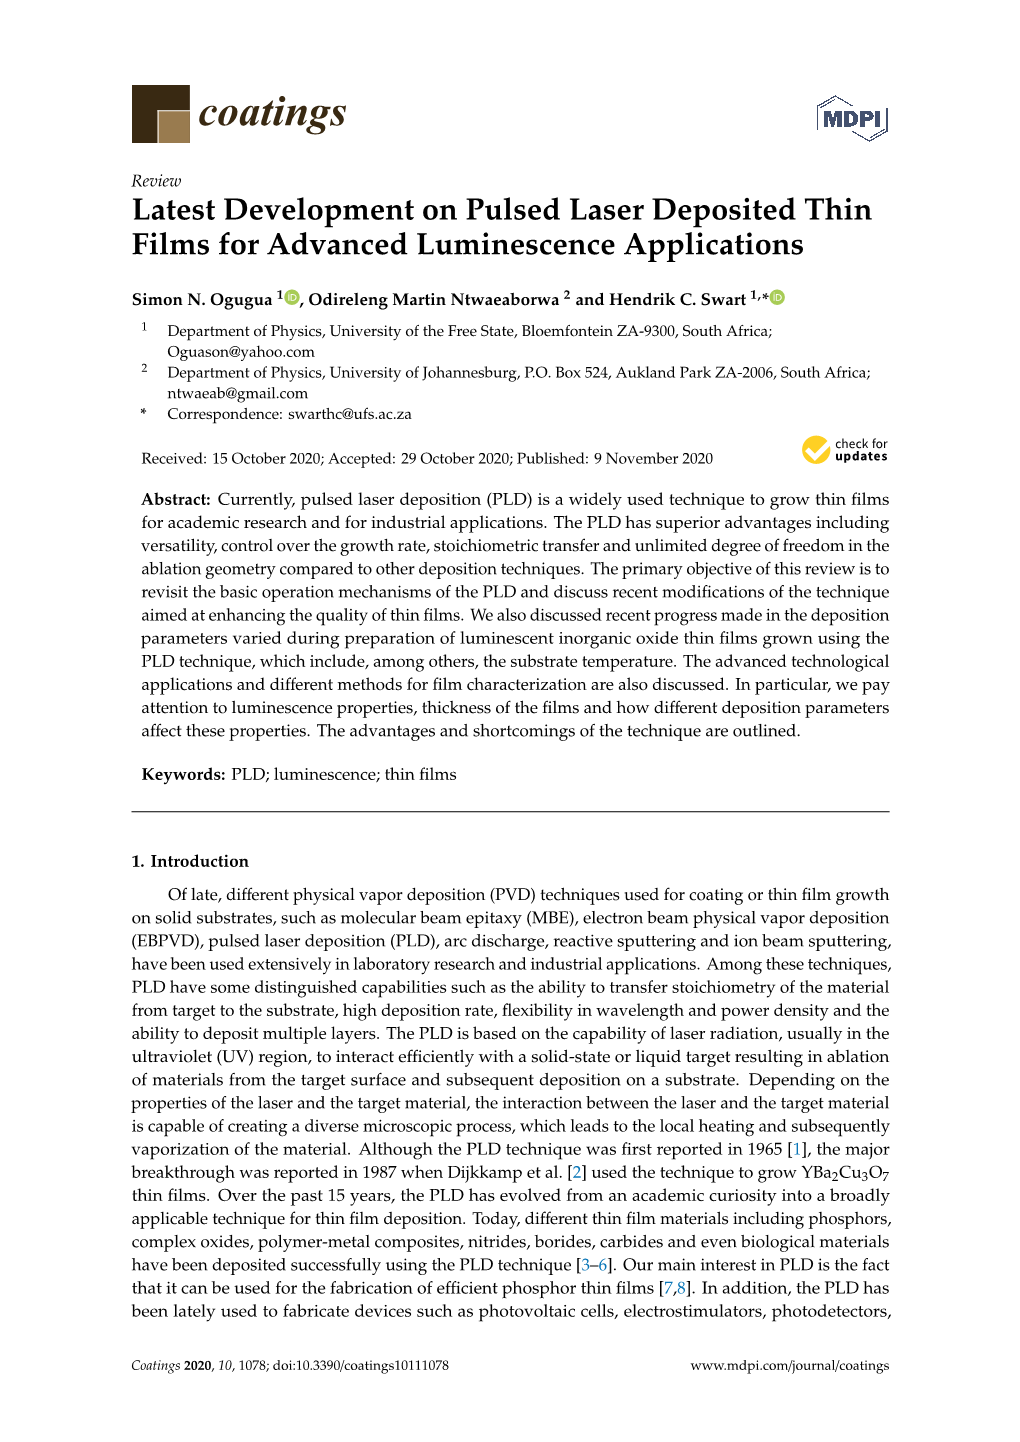 Latest Development on Pulsed Laser Deposited Thin Films for Advanced Luminescence Applications